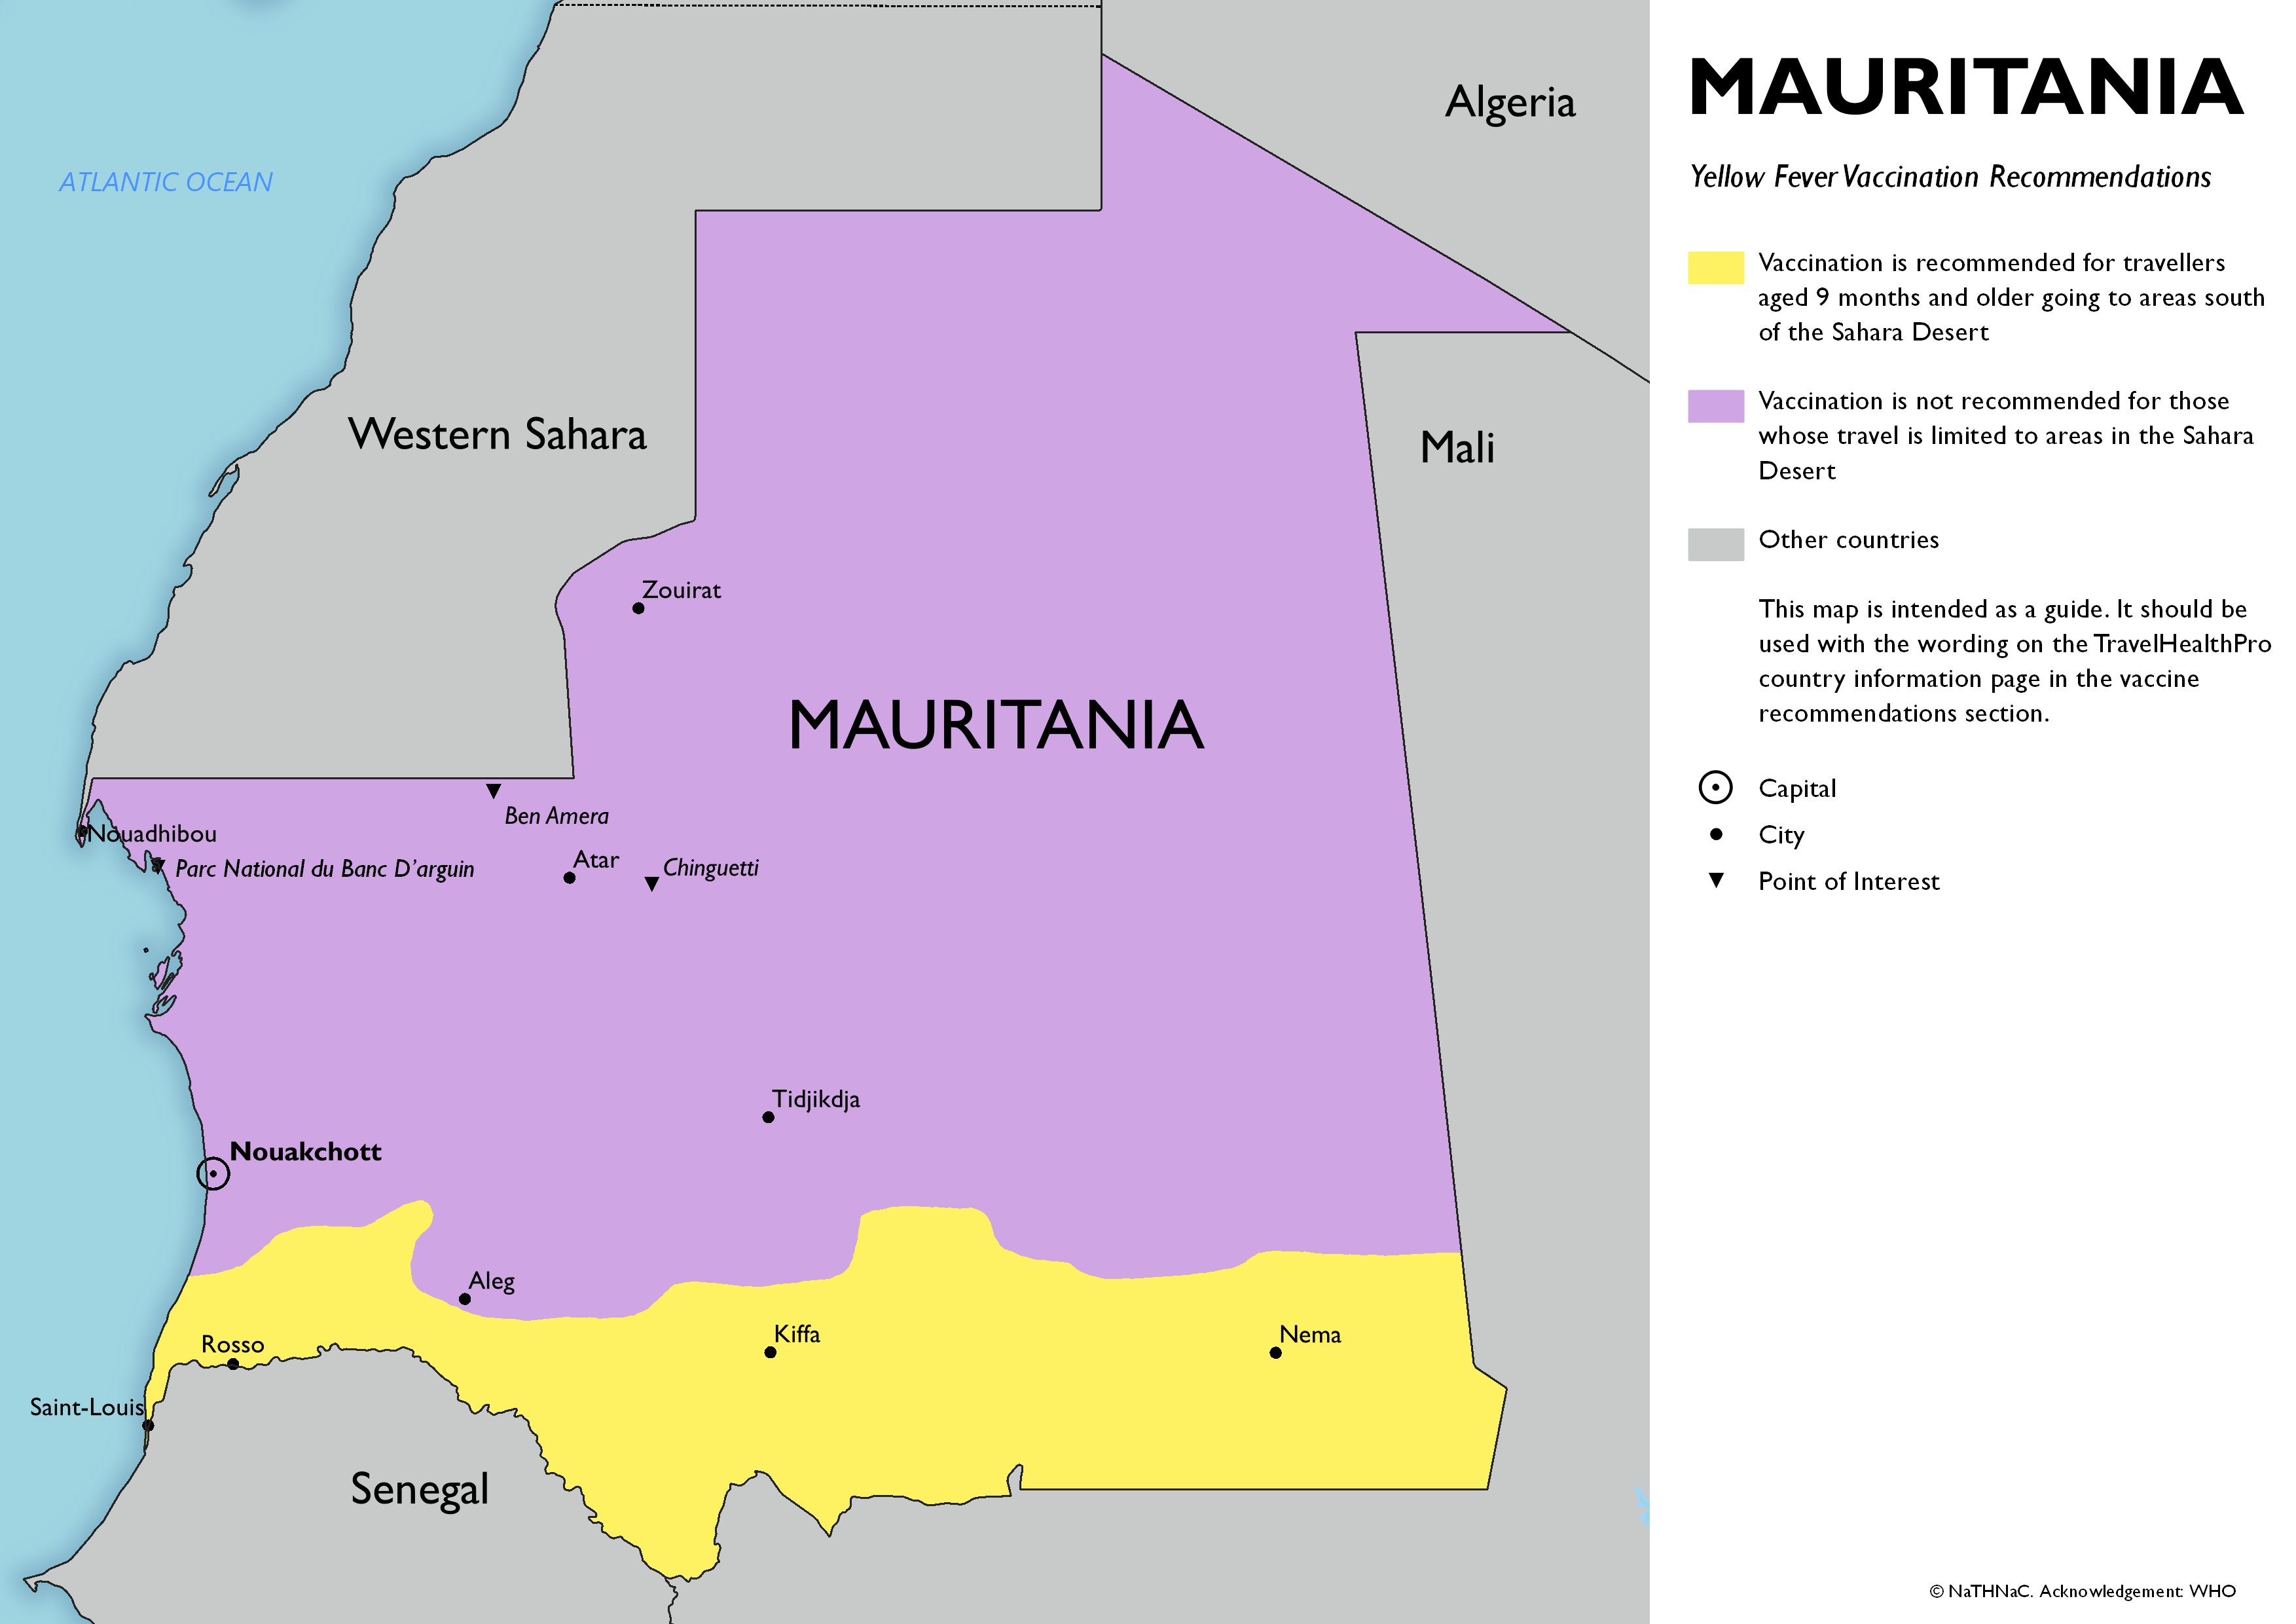 Yellow fever vaccine recommendation map for Mauritania